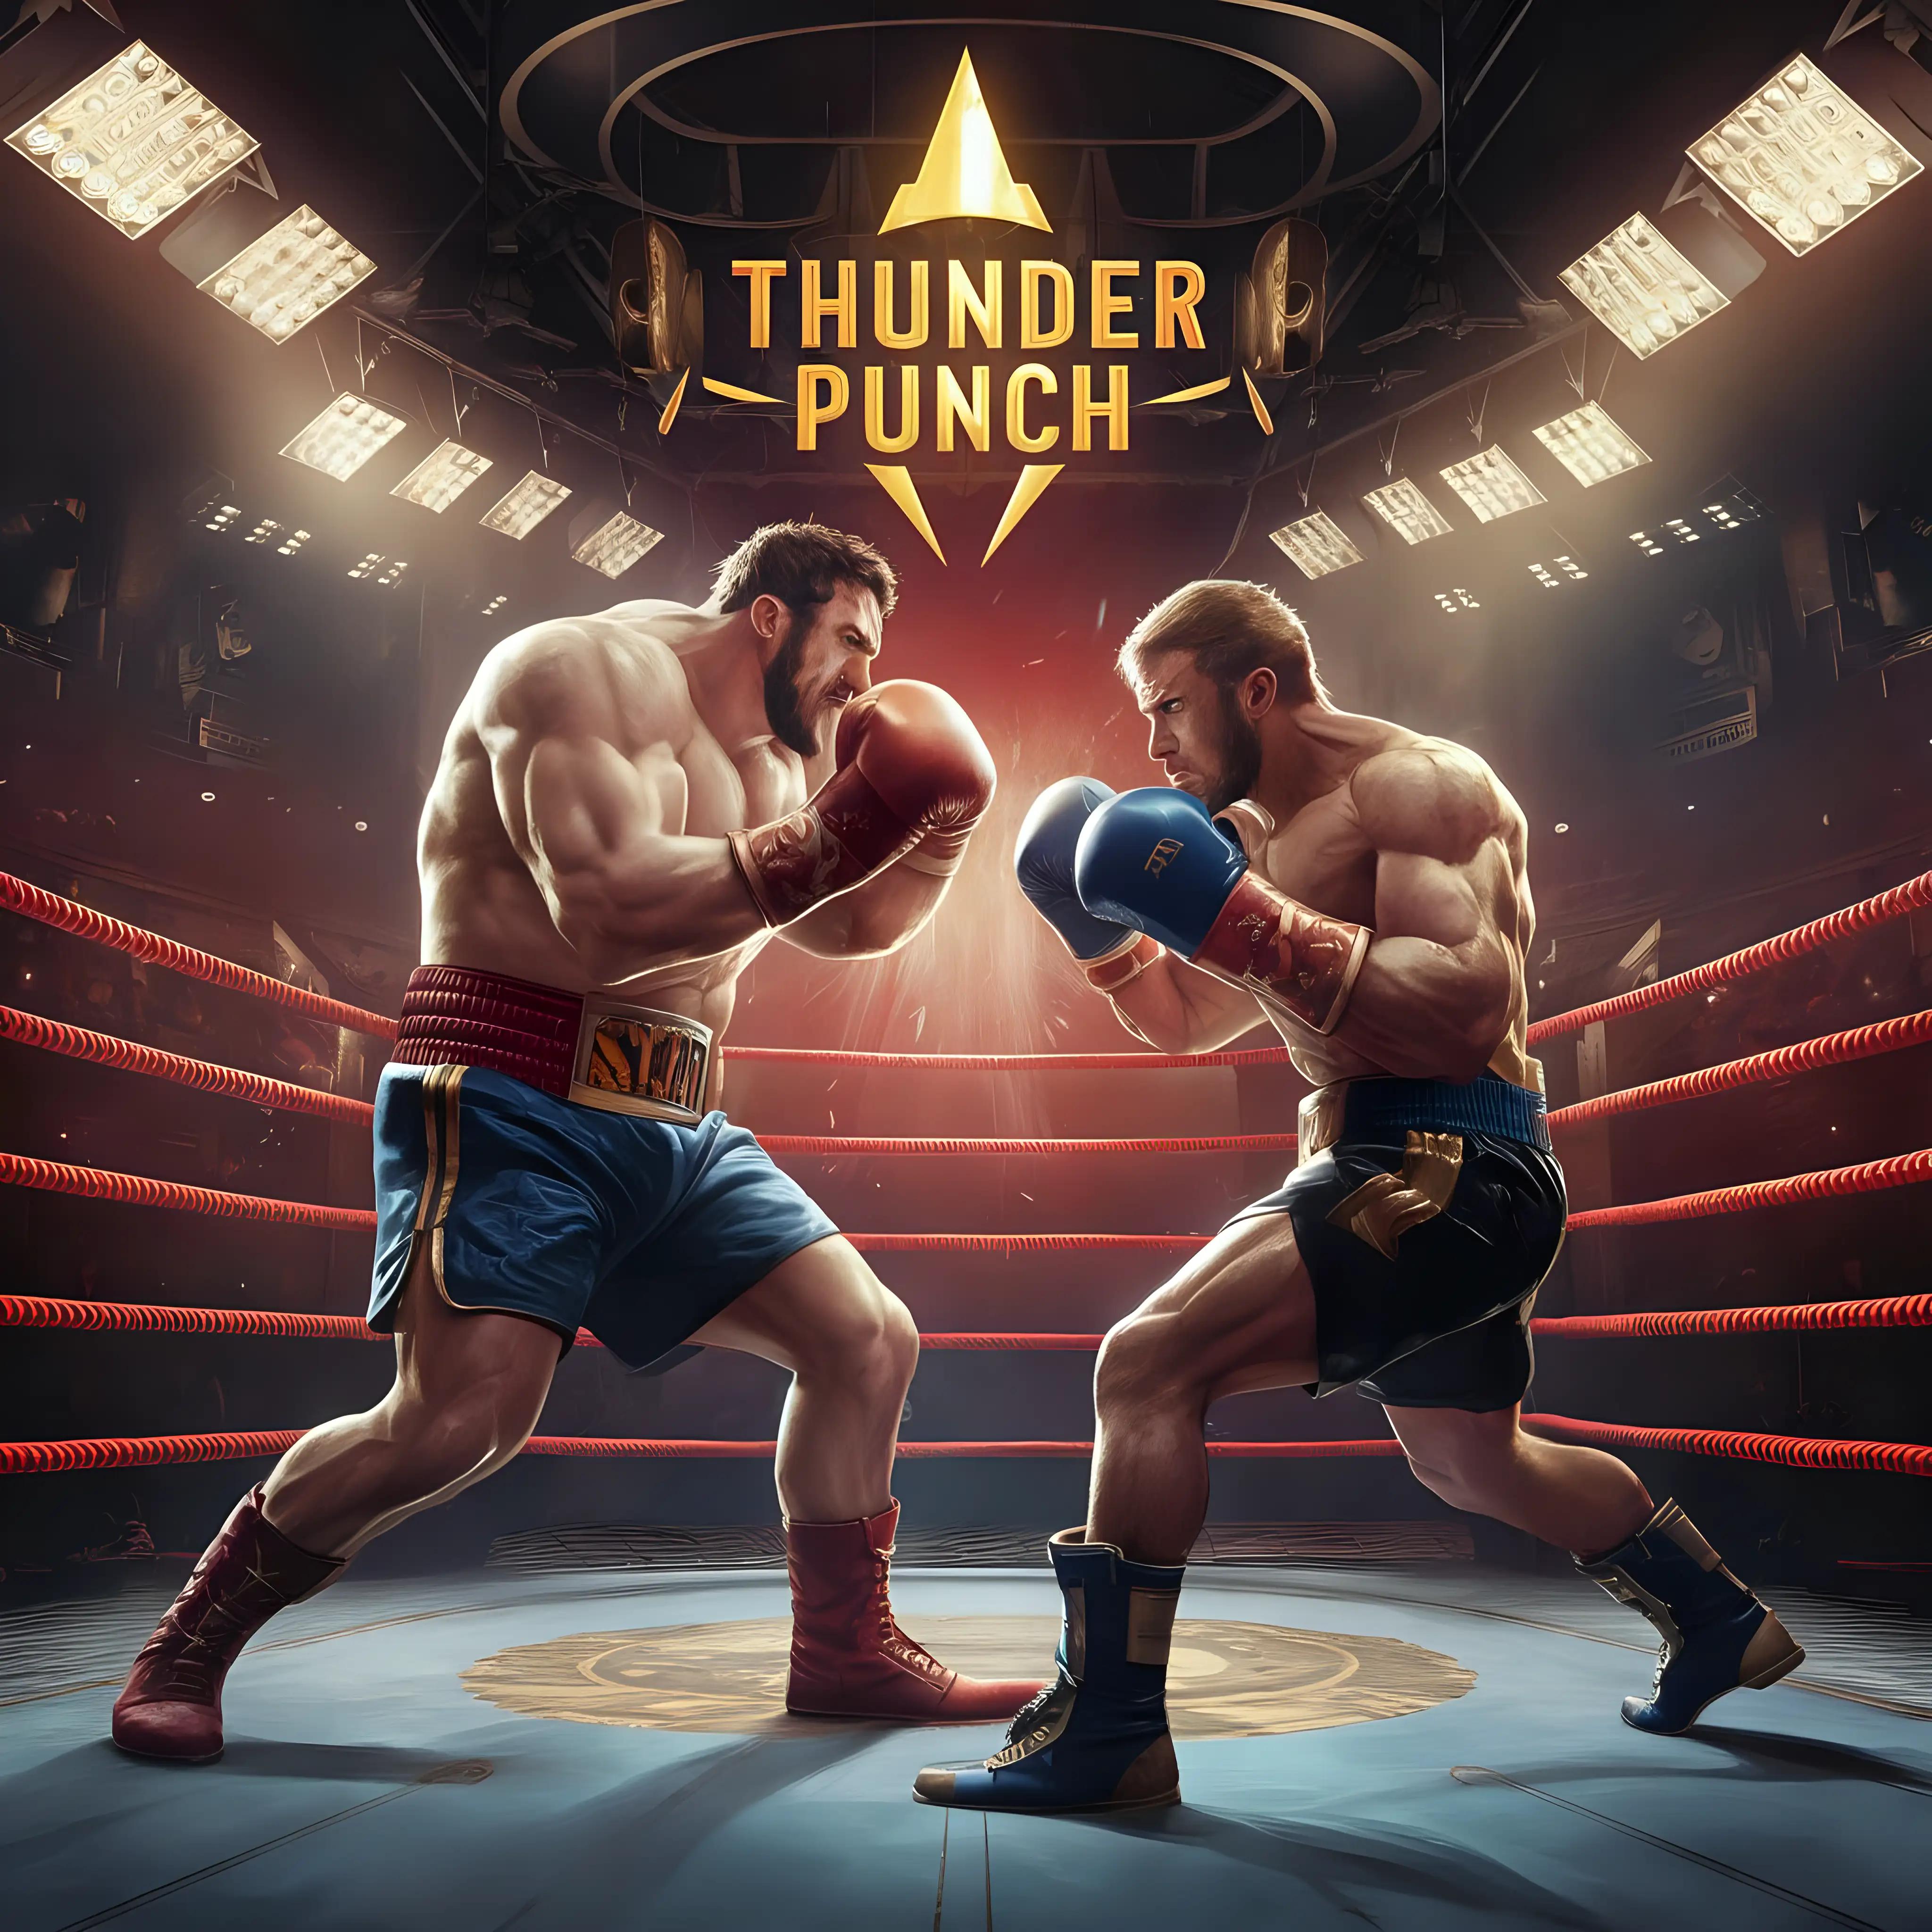 The header of the "Thunder Punch" rulebook presents a dynamic illustration that captures the very essence of the action and excitement of the game. In the center of the image, an imposing boxing ring occupies a prominent place, its ropes taut and its corners illuminated by spotlights.

In the ring, two boxers face each other, ready to clash in an epic battle. The first boxer embodies the brute force and power of the Slugger style, his muscles tense and his determined gaze testifying to his determination to win.

Facing him, his opponent represents the agility and strategy of the Technician style. His posture is fluid and graceful, showing his confidence in his defensive and counter-attacking skills.

Around the ring, the audience is depicted in blurry shadows in the stands, their agitation and excitement manifested by blurry silhouettes and arm movements. The spotlights illuminate the ring, adding a touch of dynamism and realism to the scene.

In the upper right corner of the illustration, the "Thunder Punch" logo shines in bold and vibrant letters, capturing the reader's attention with its catchy style.

Overall, the illustration on the header of the "Thunder Punch" rulebook provides a taste of the thrilling action that awaits players in the ring, while capturing the essence of the boxing universe with style and panache.